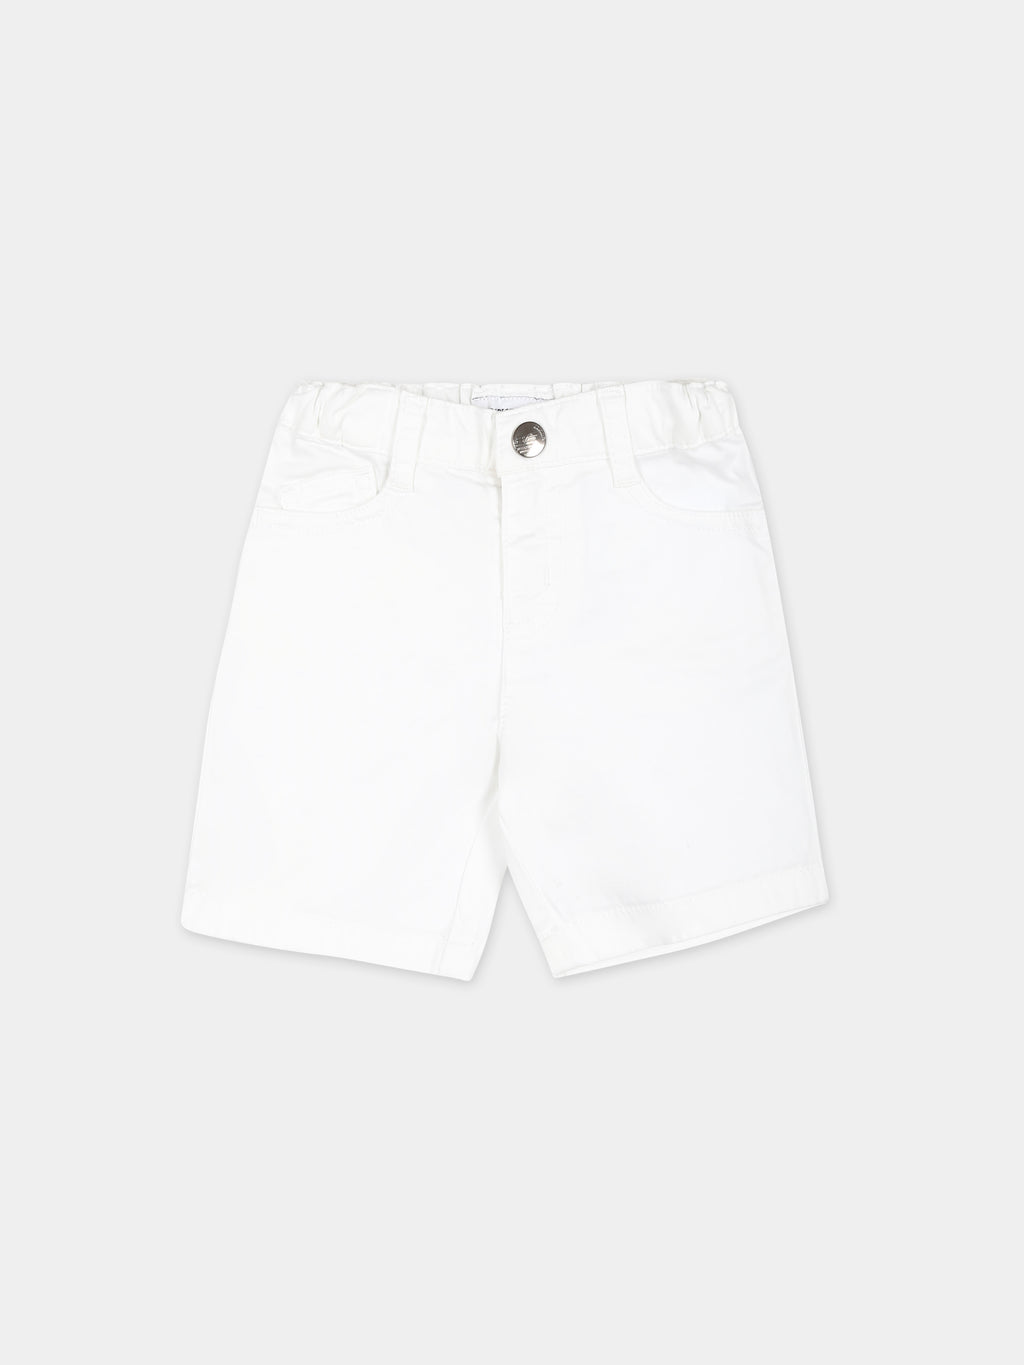 White shorts for baby boy with eagle